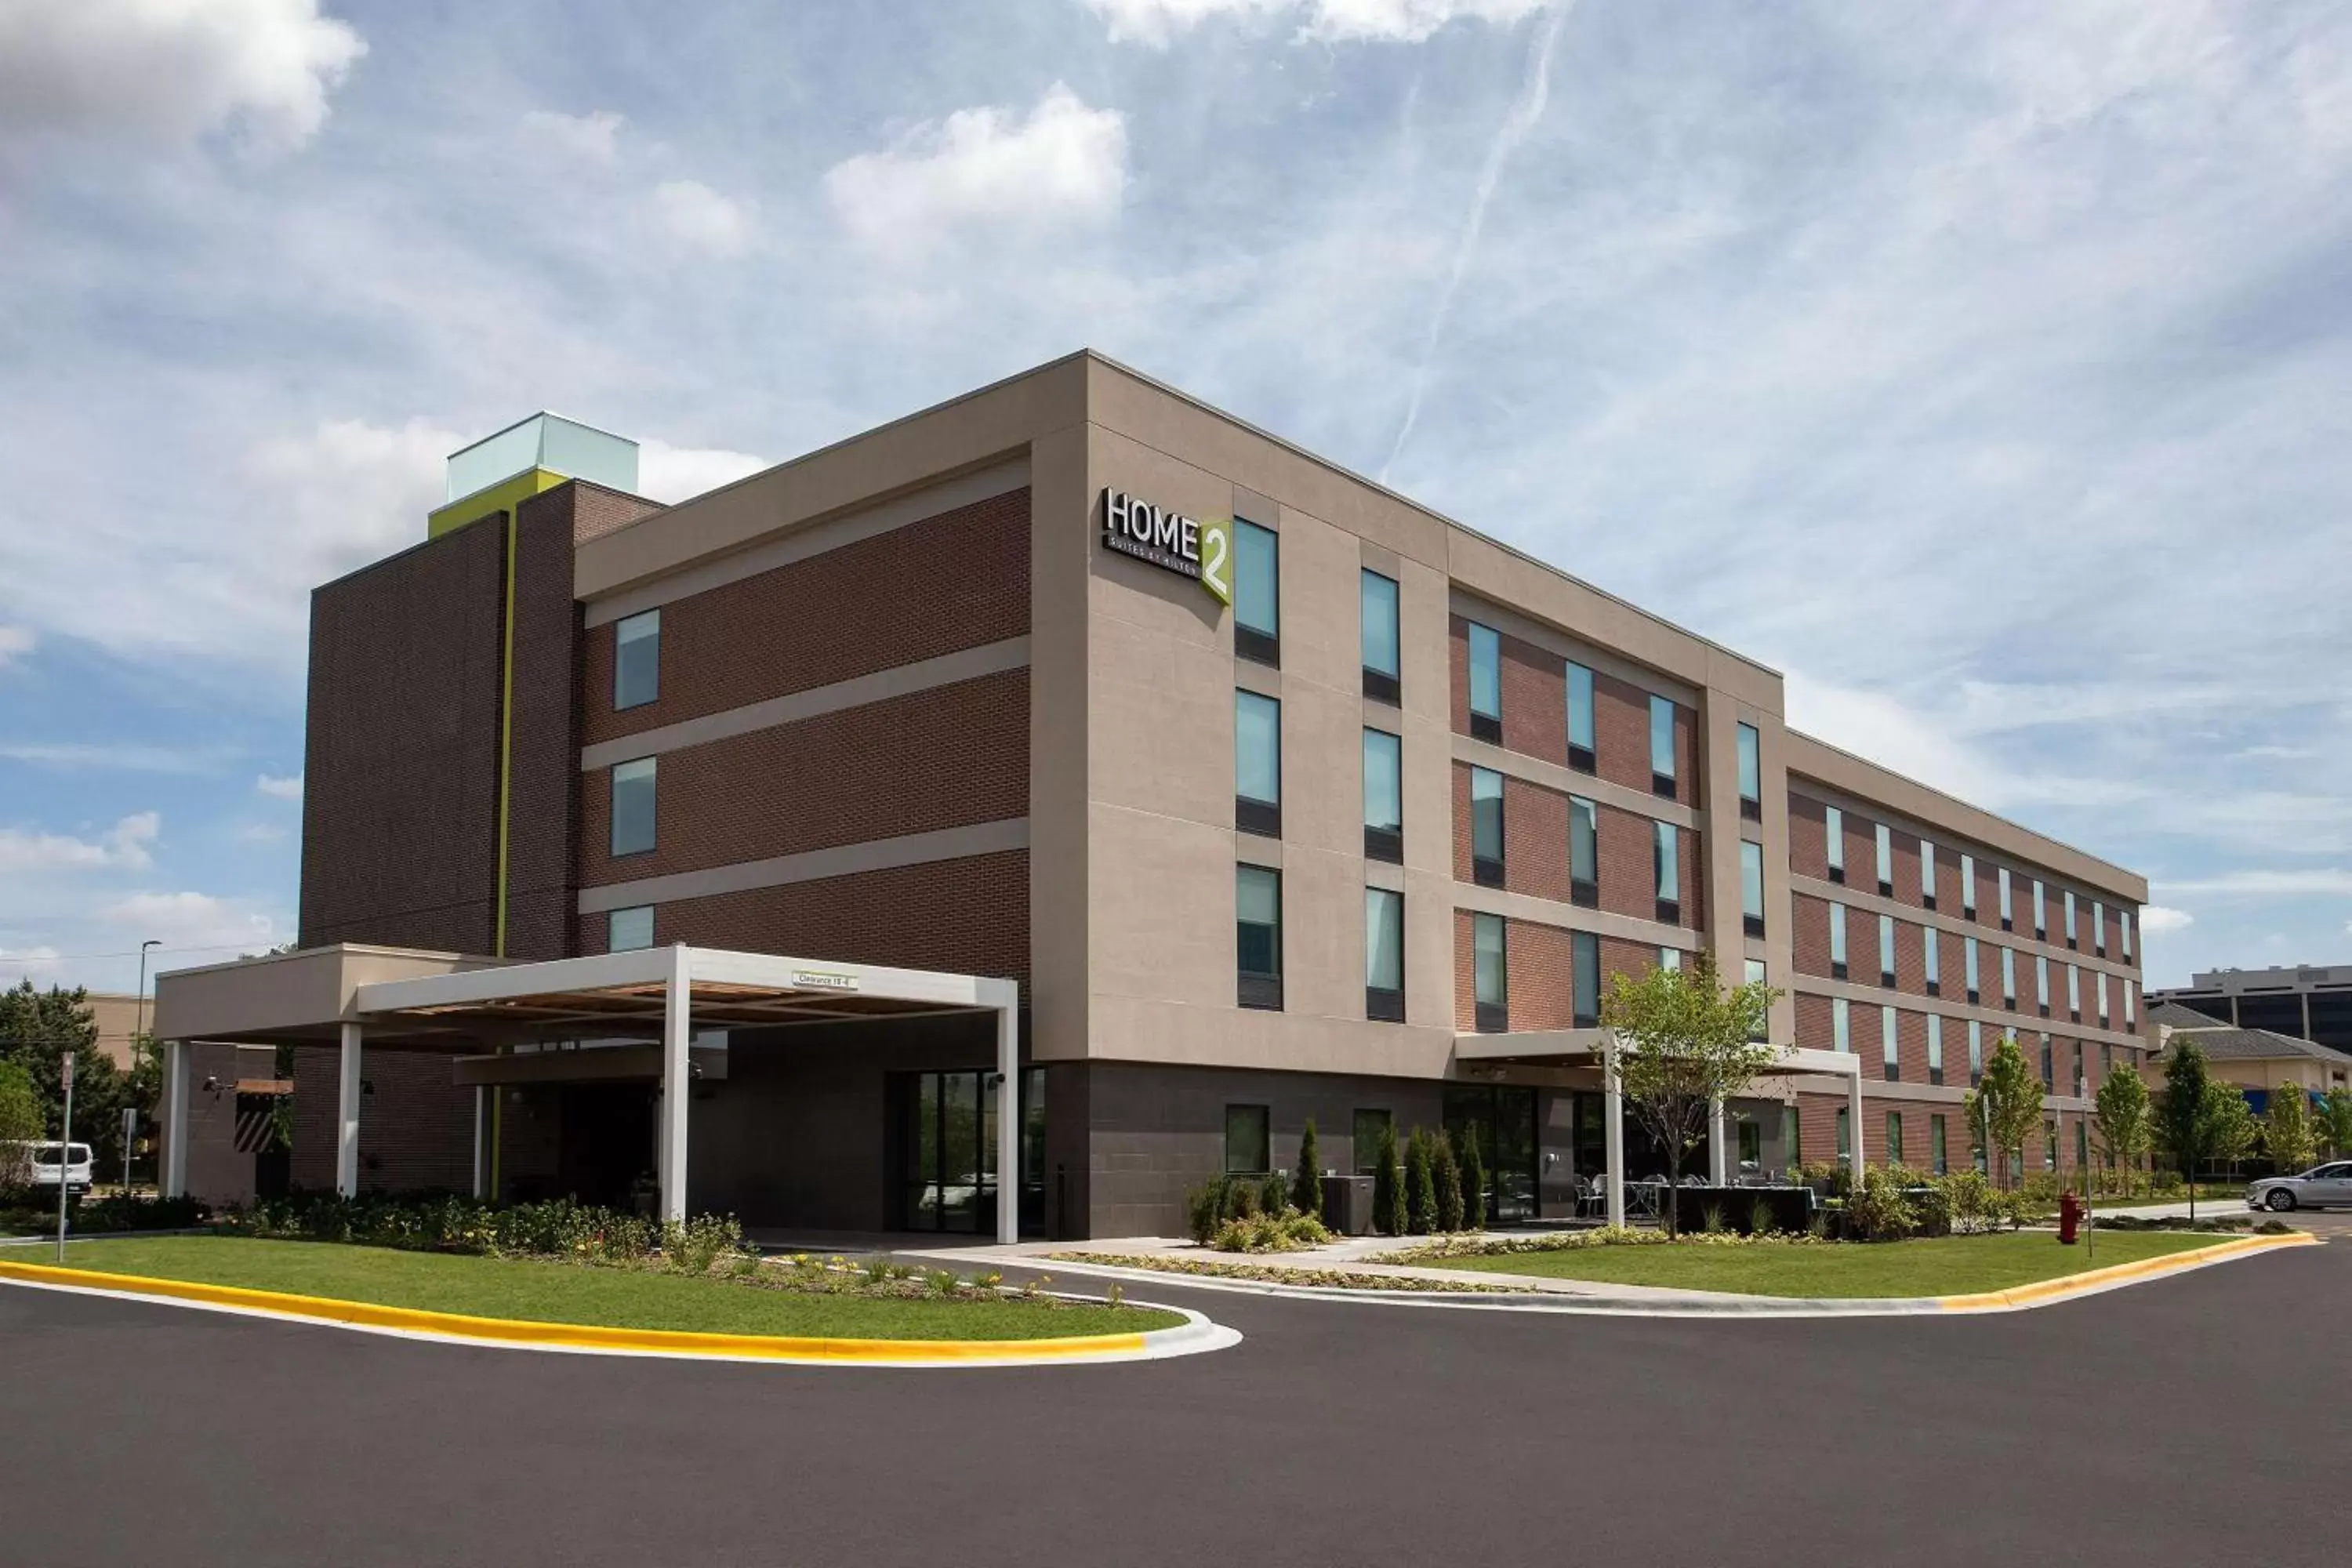 Property Building in Home2 Suites By Hilton Chicago Schaumburg